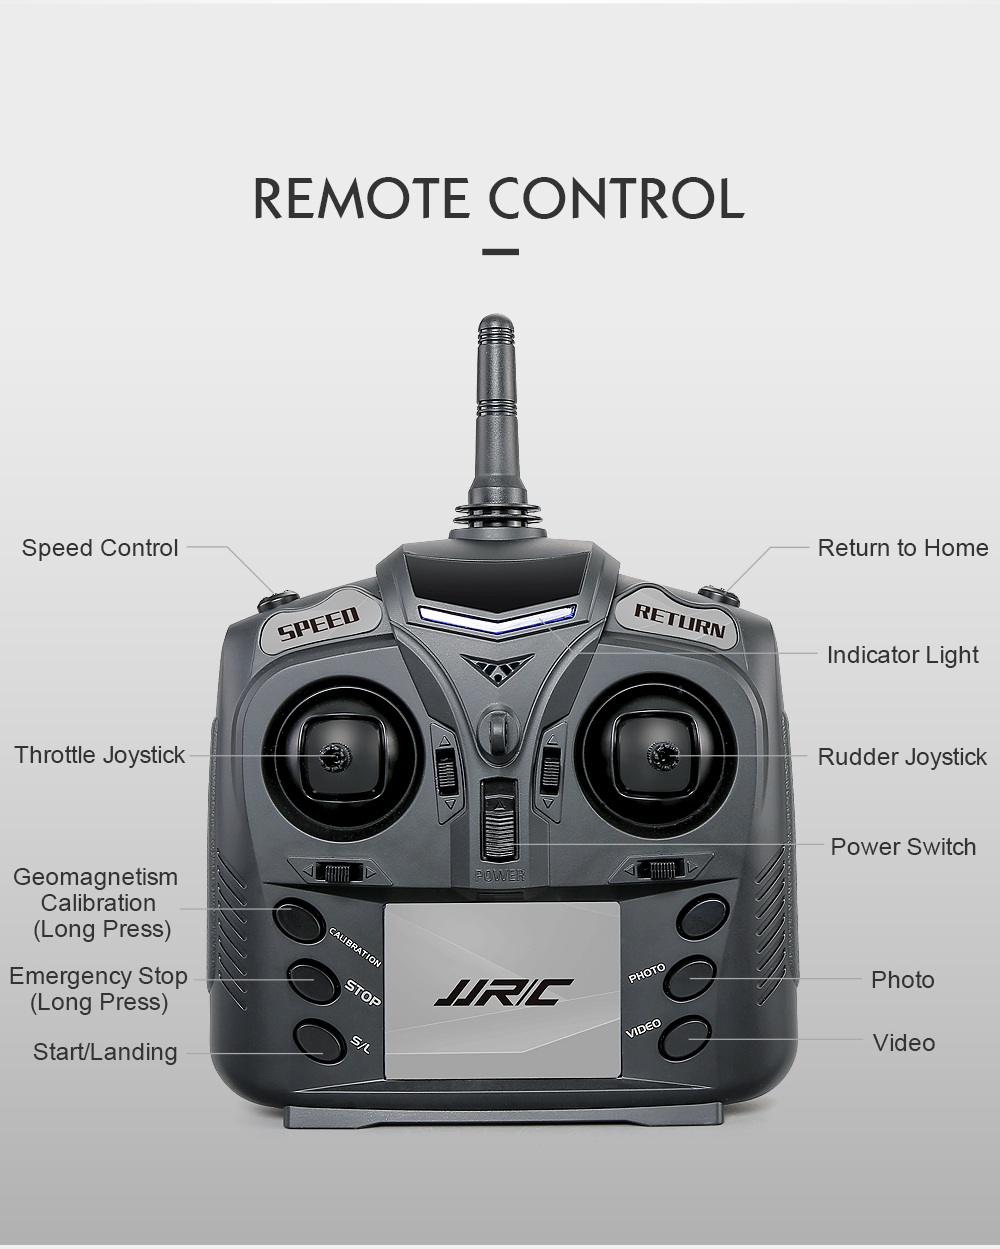 jjrc-h55wh-entry-level-aerial-photography-drone-with-gps - Drone - JJRC